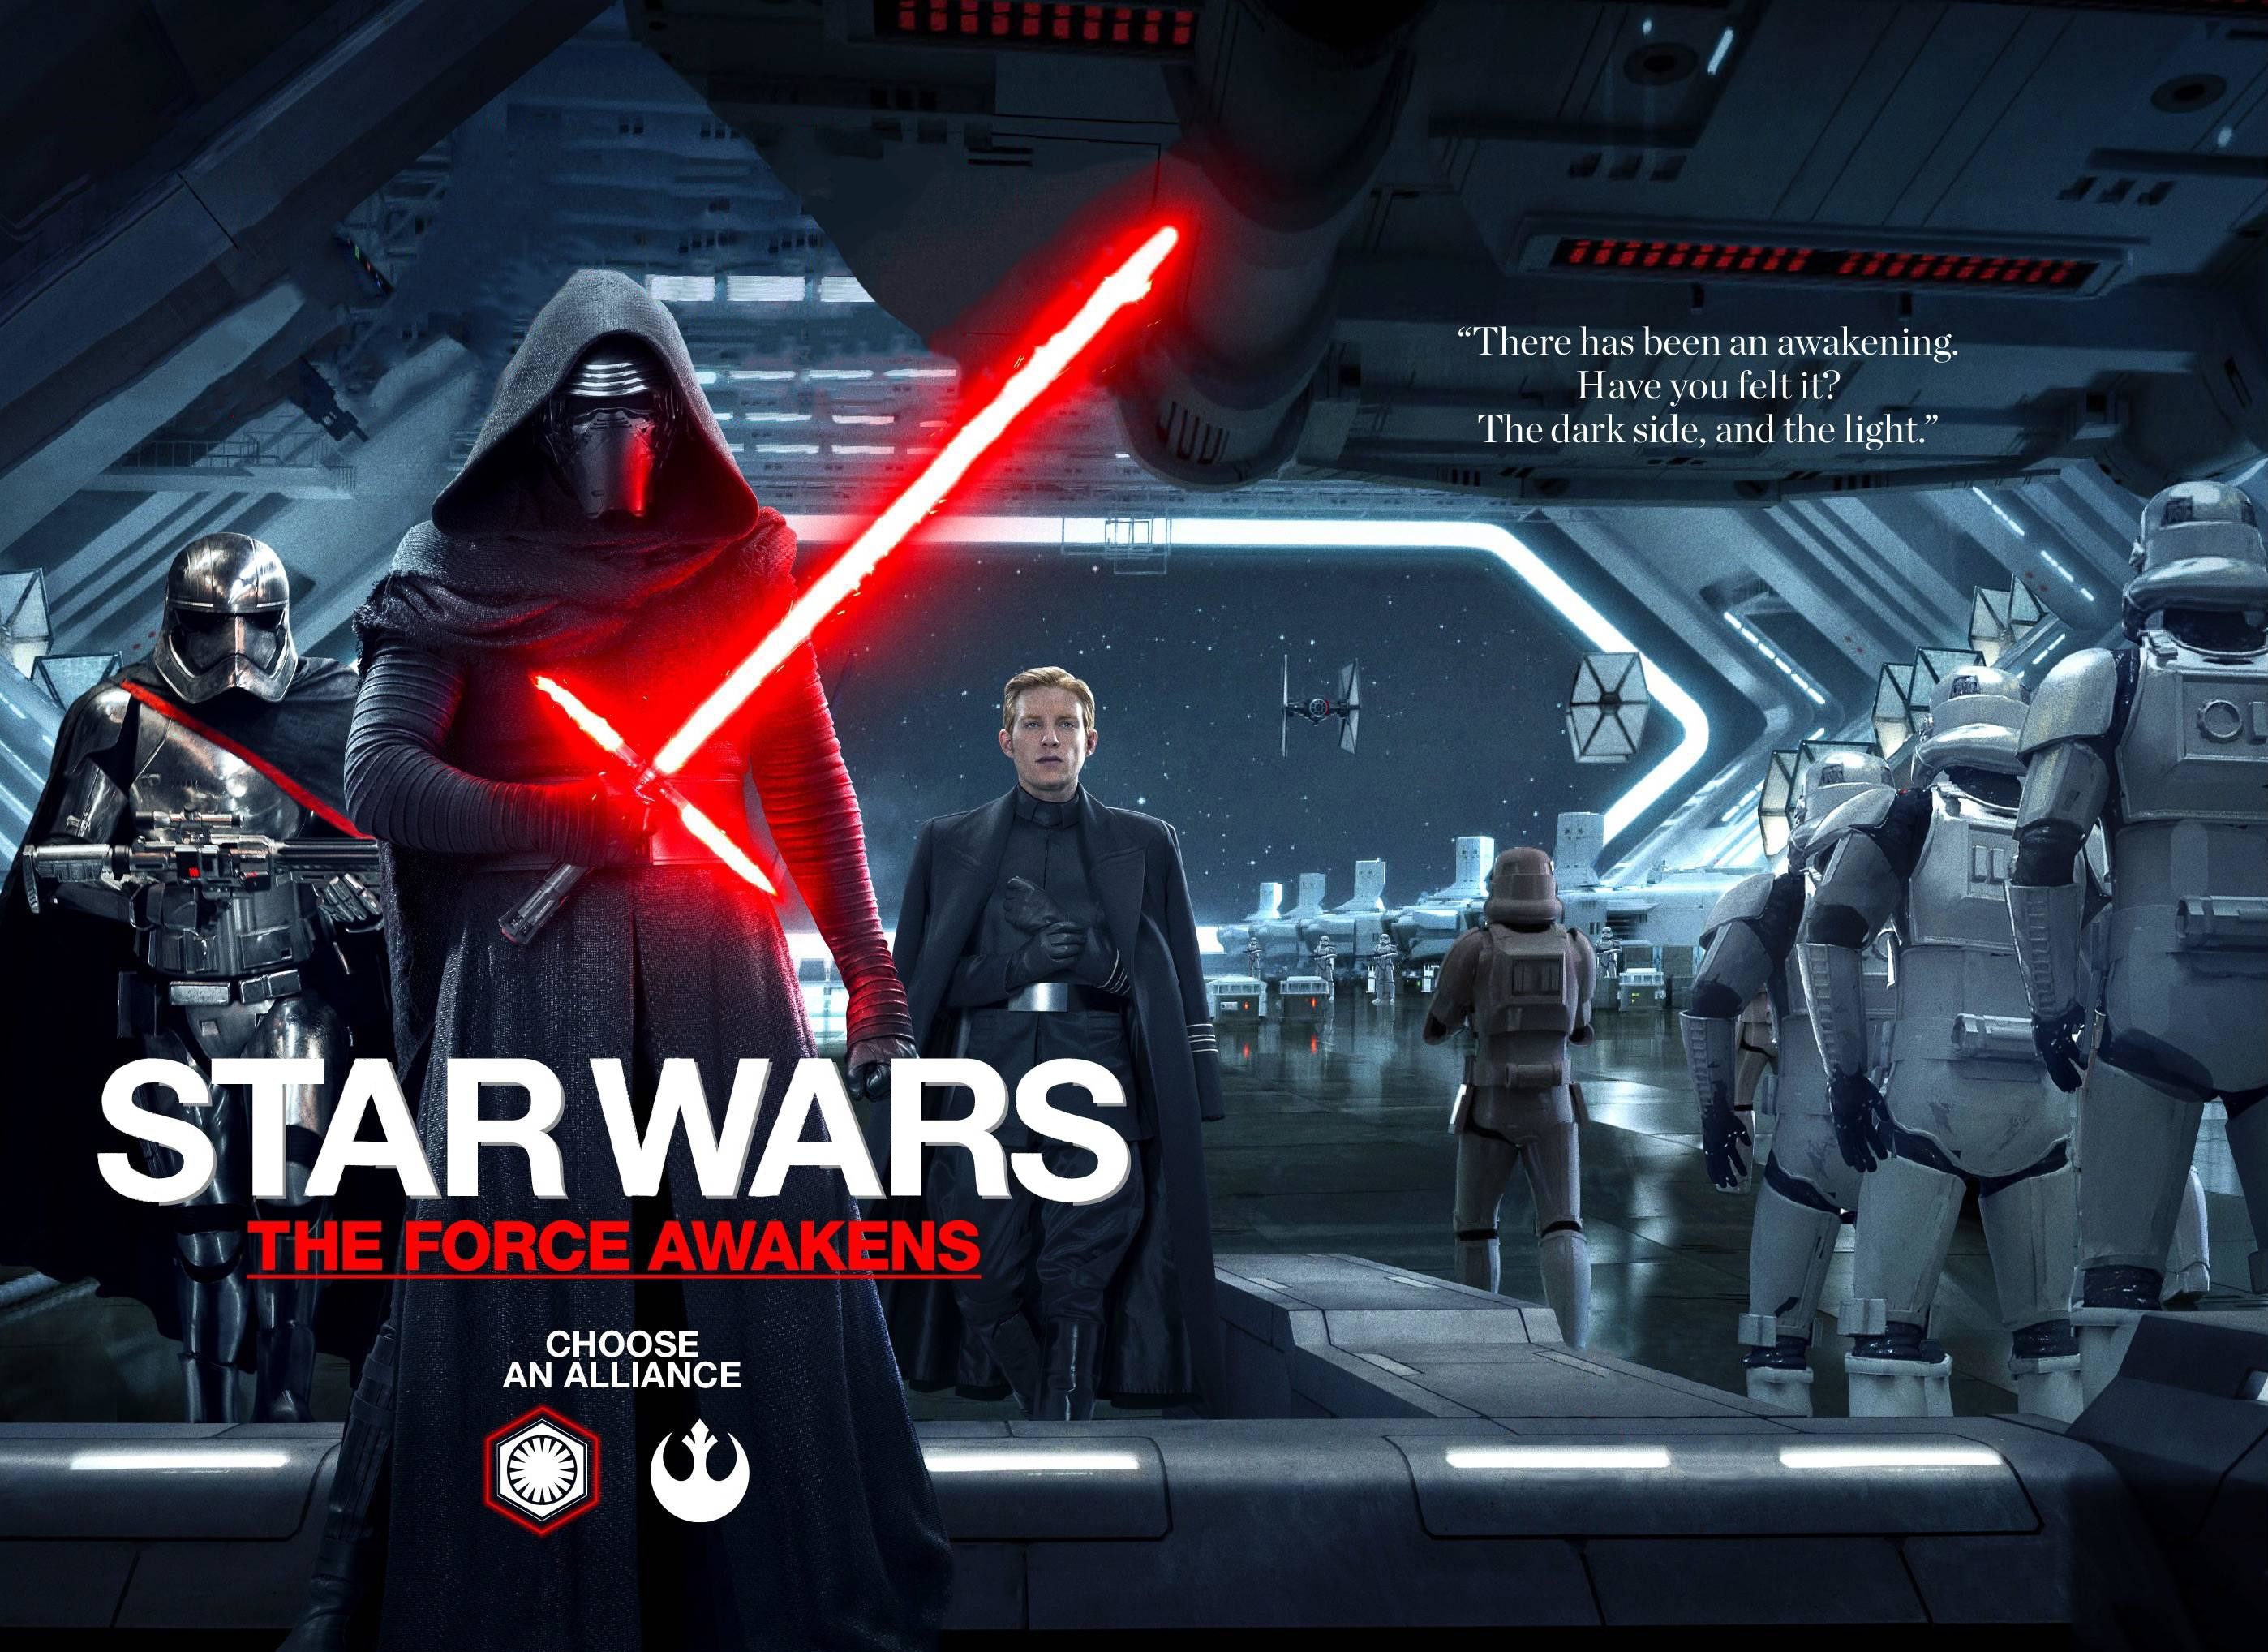 2796x2036 Star Wars: The Force Awakens Empire Magazine First Order Cover (Wallpaper/Poster  Edit)